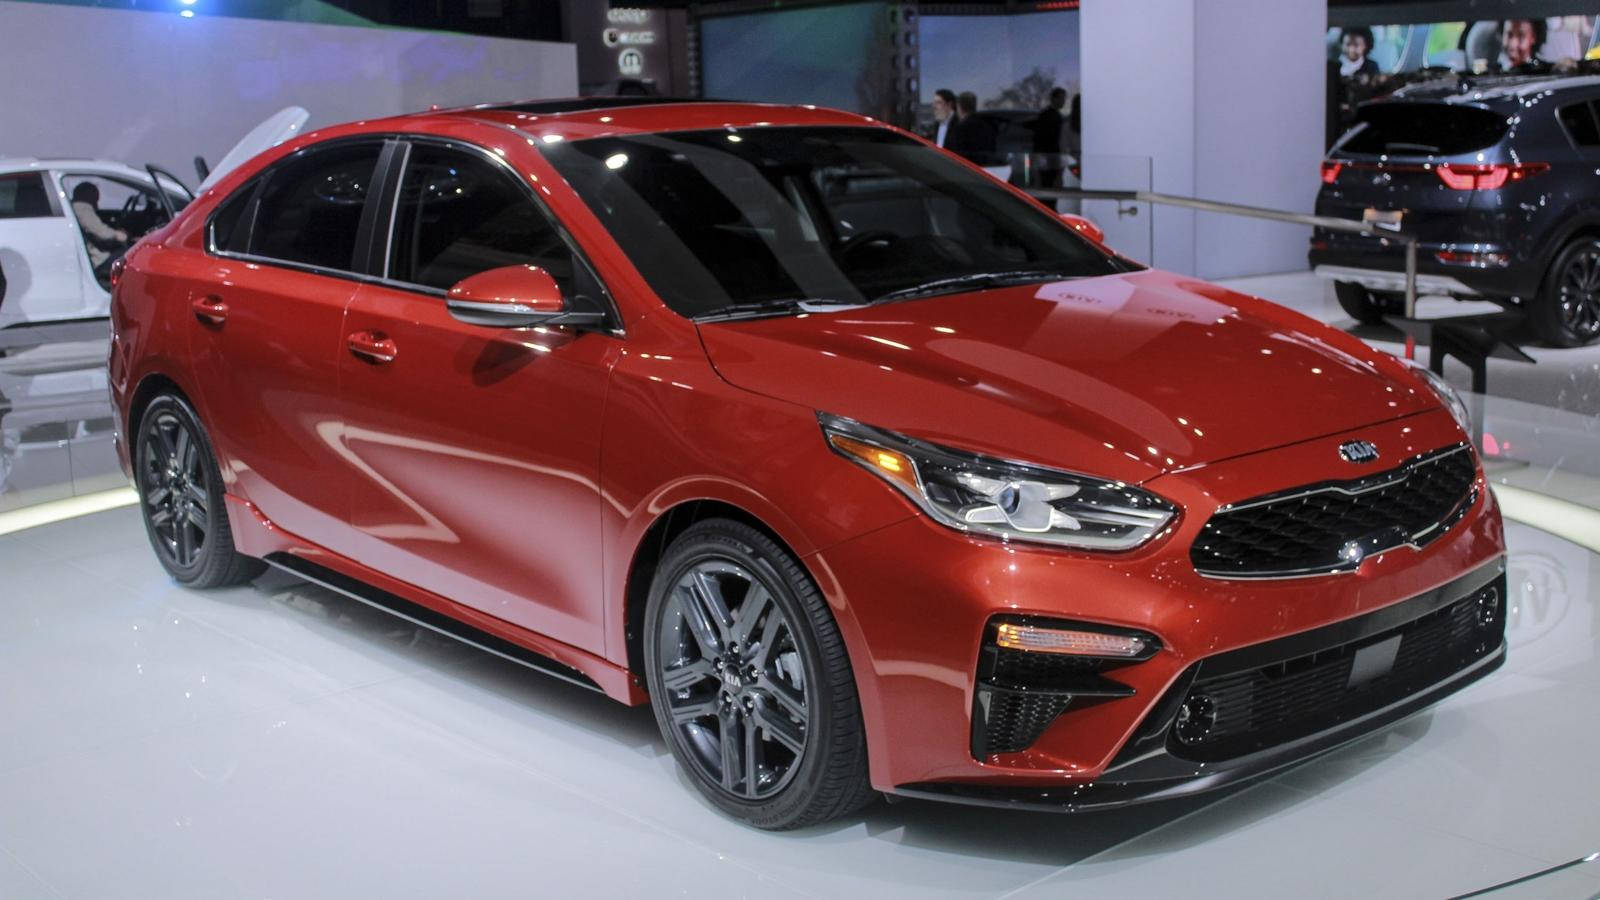 Kia Forte Picture, Photo, Wallpaper And Video. Top Background